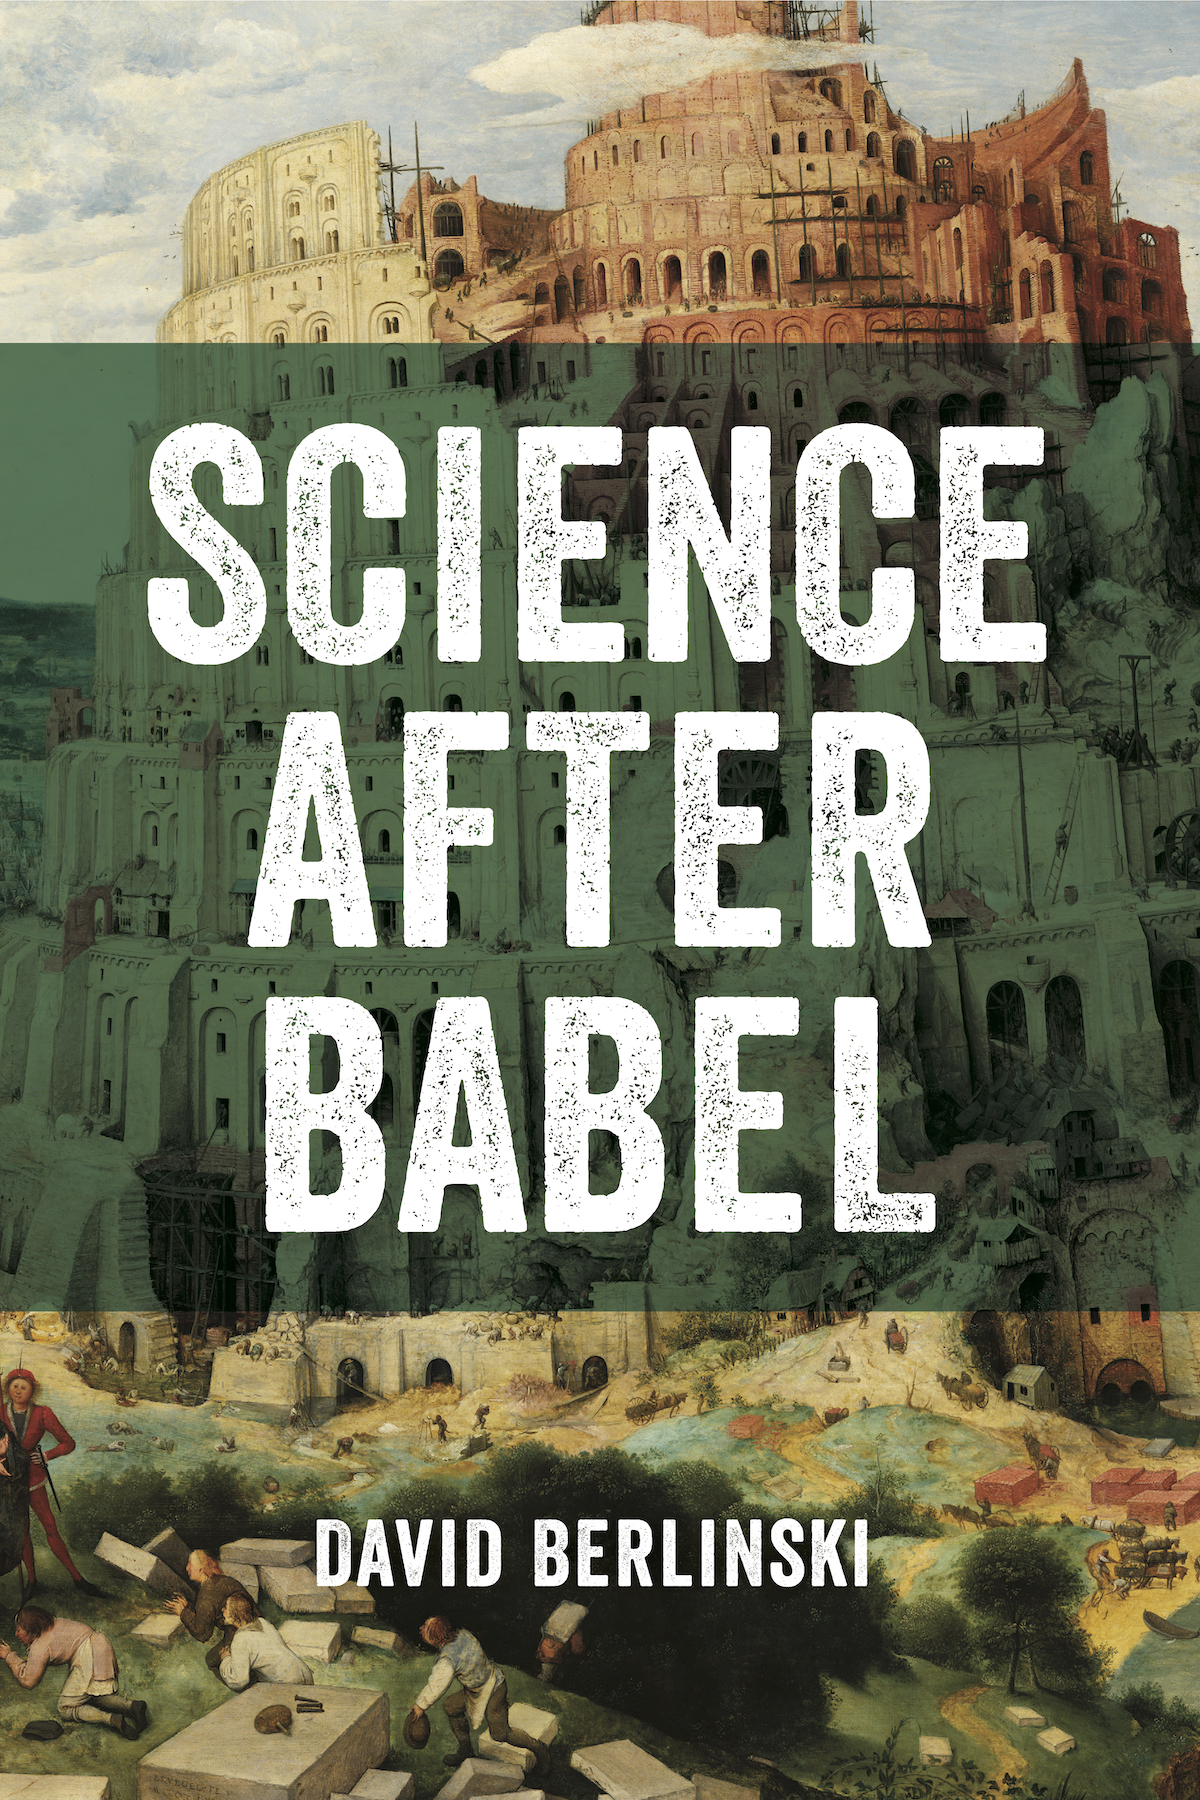 Science After Babel - Discovery Institute Press